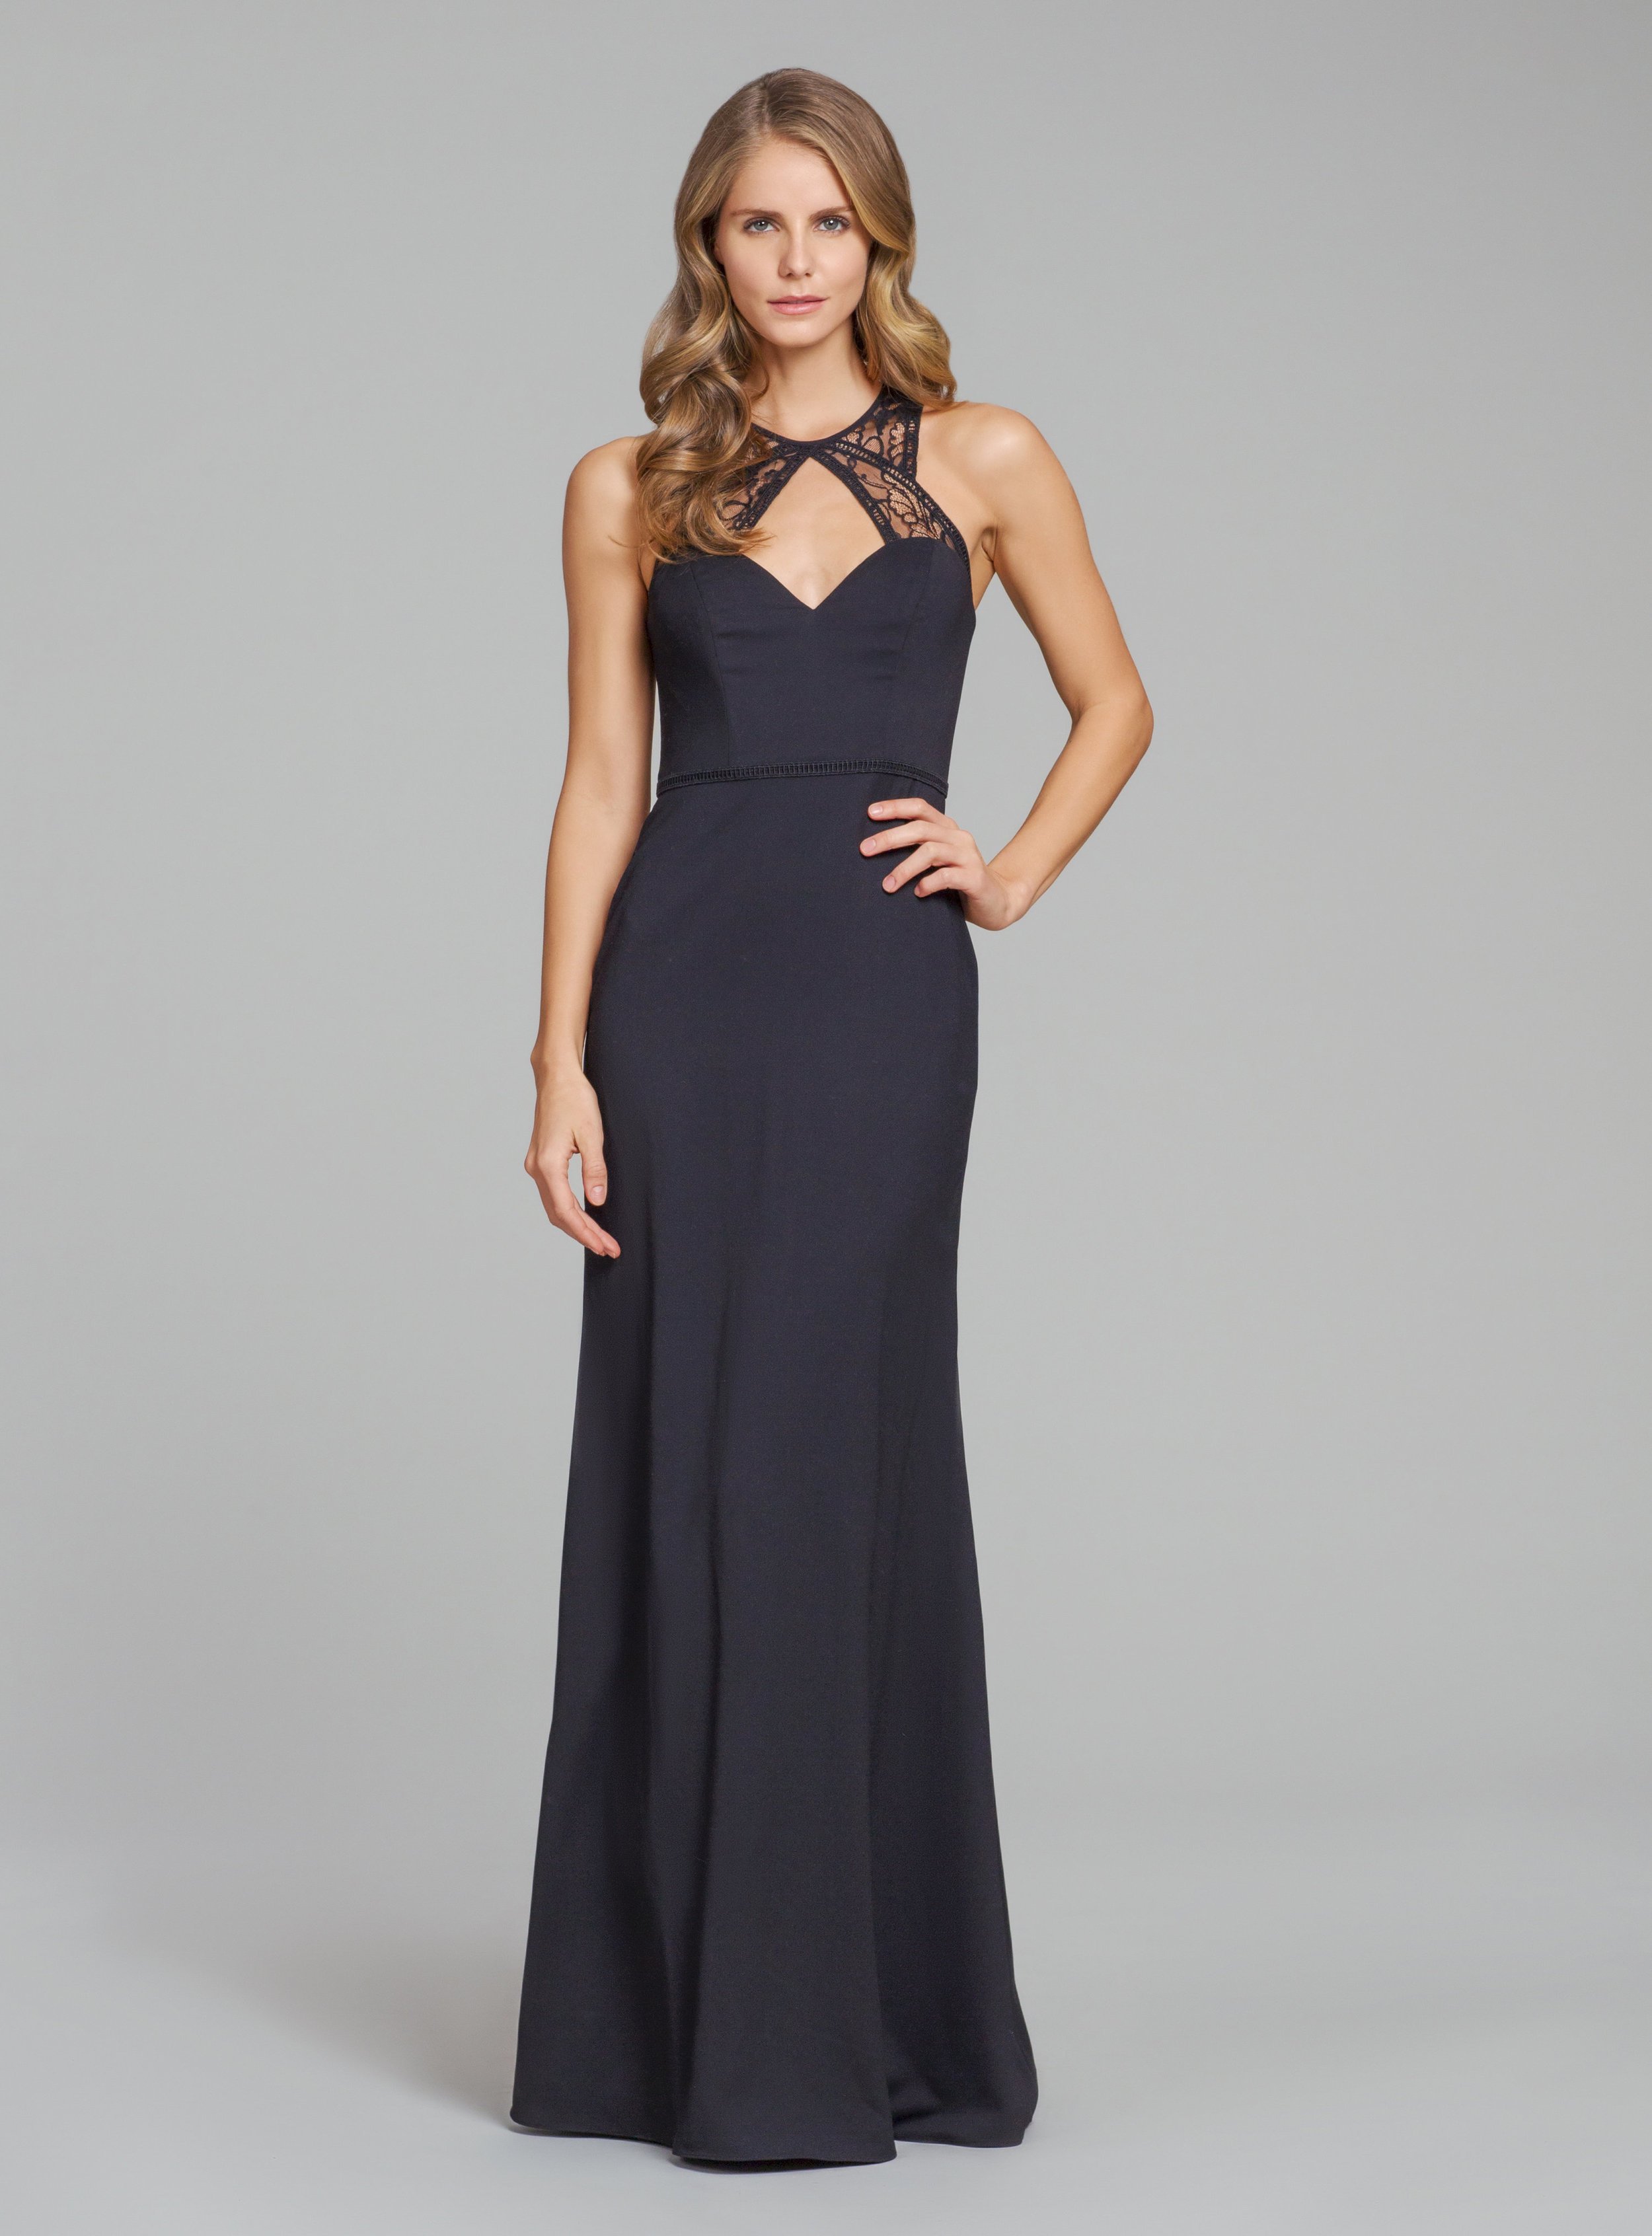 hayley-paige-occasions-bridesmaids-fall-2018-style-5867.jpg